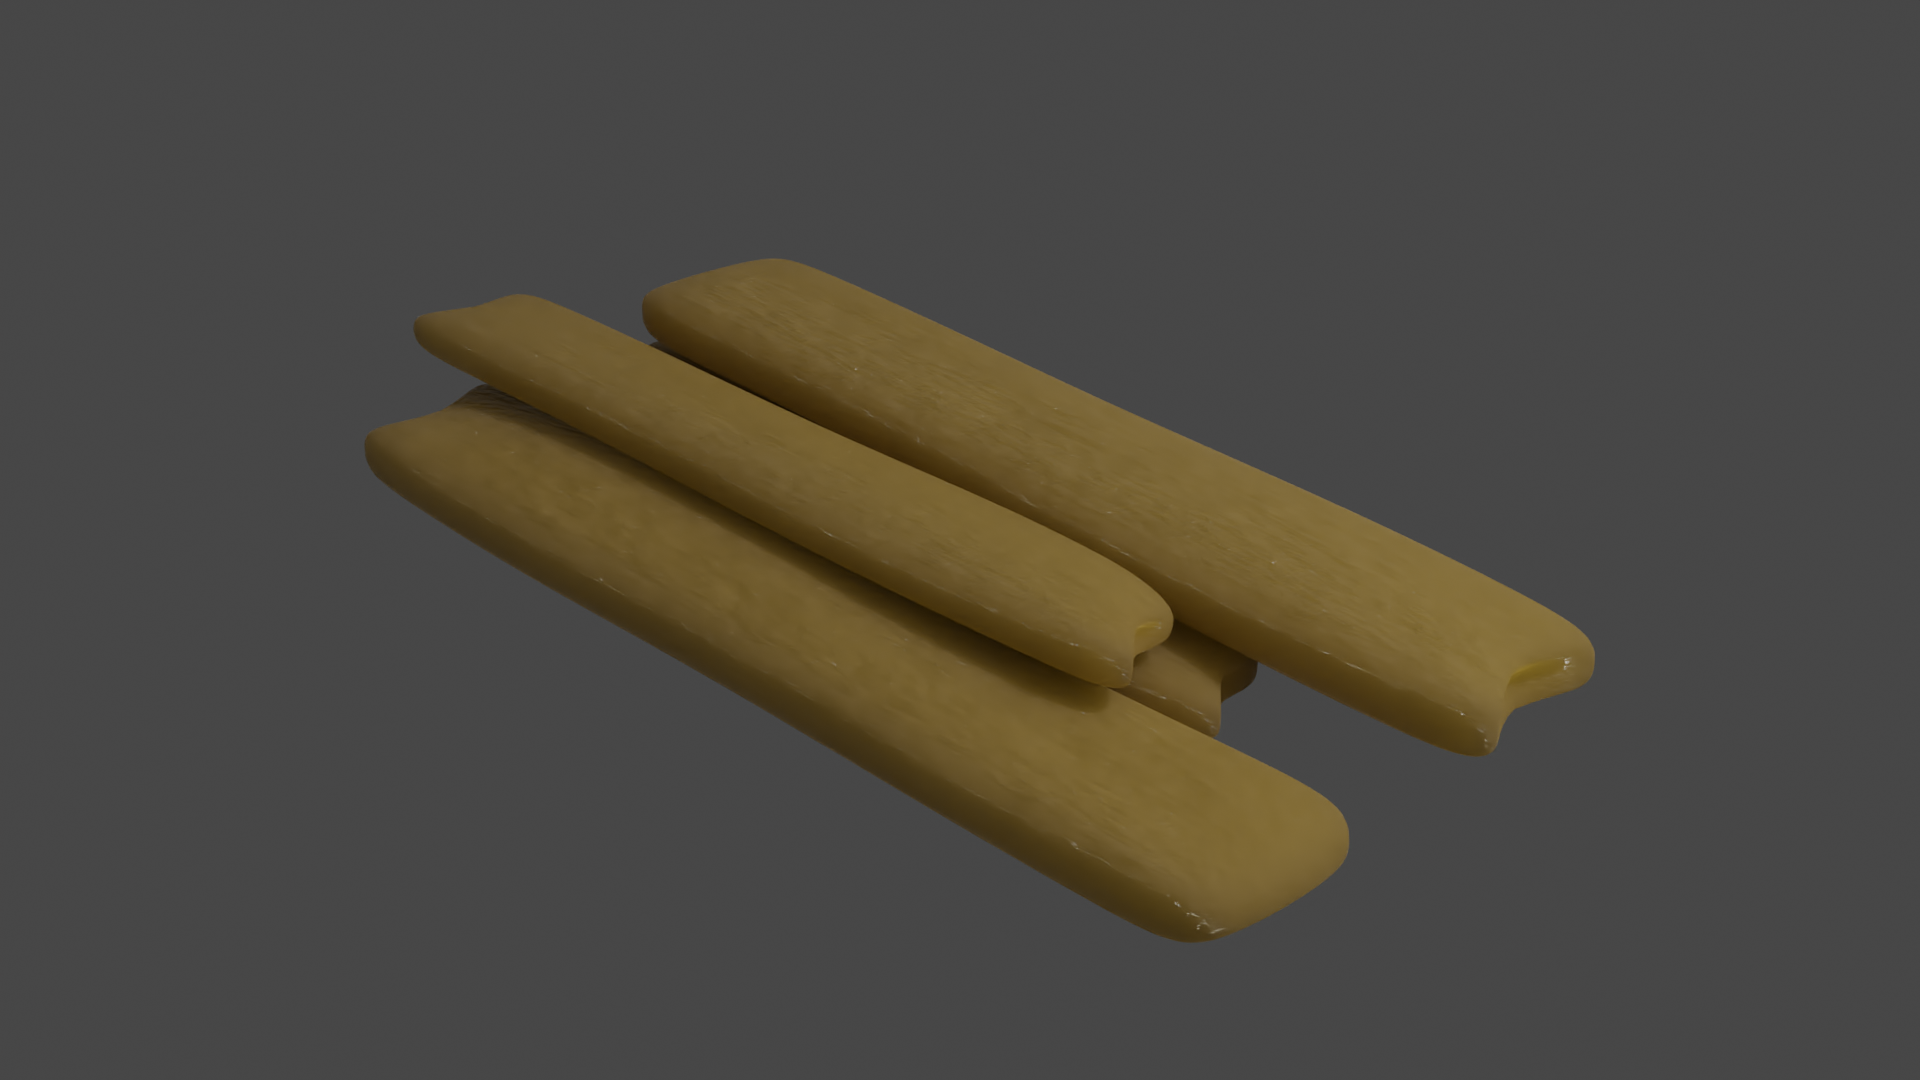 images/gallery/renders/veg_bamboo.png